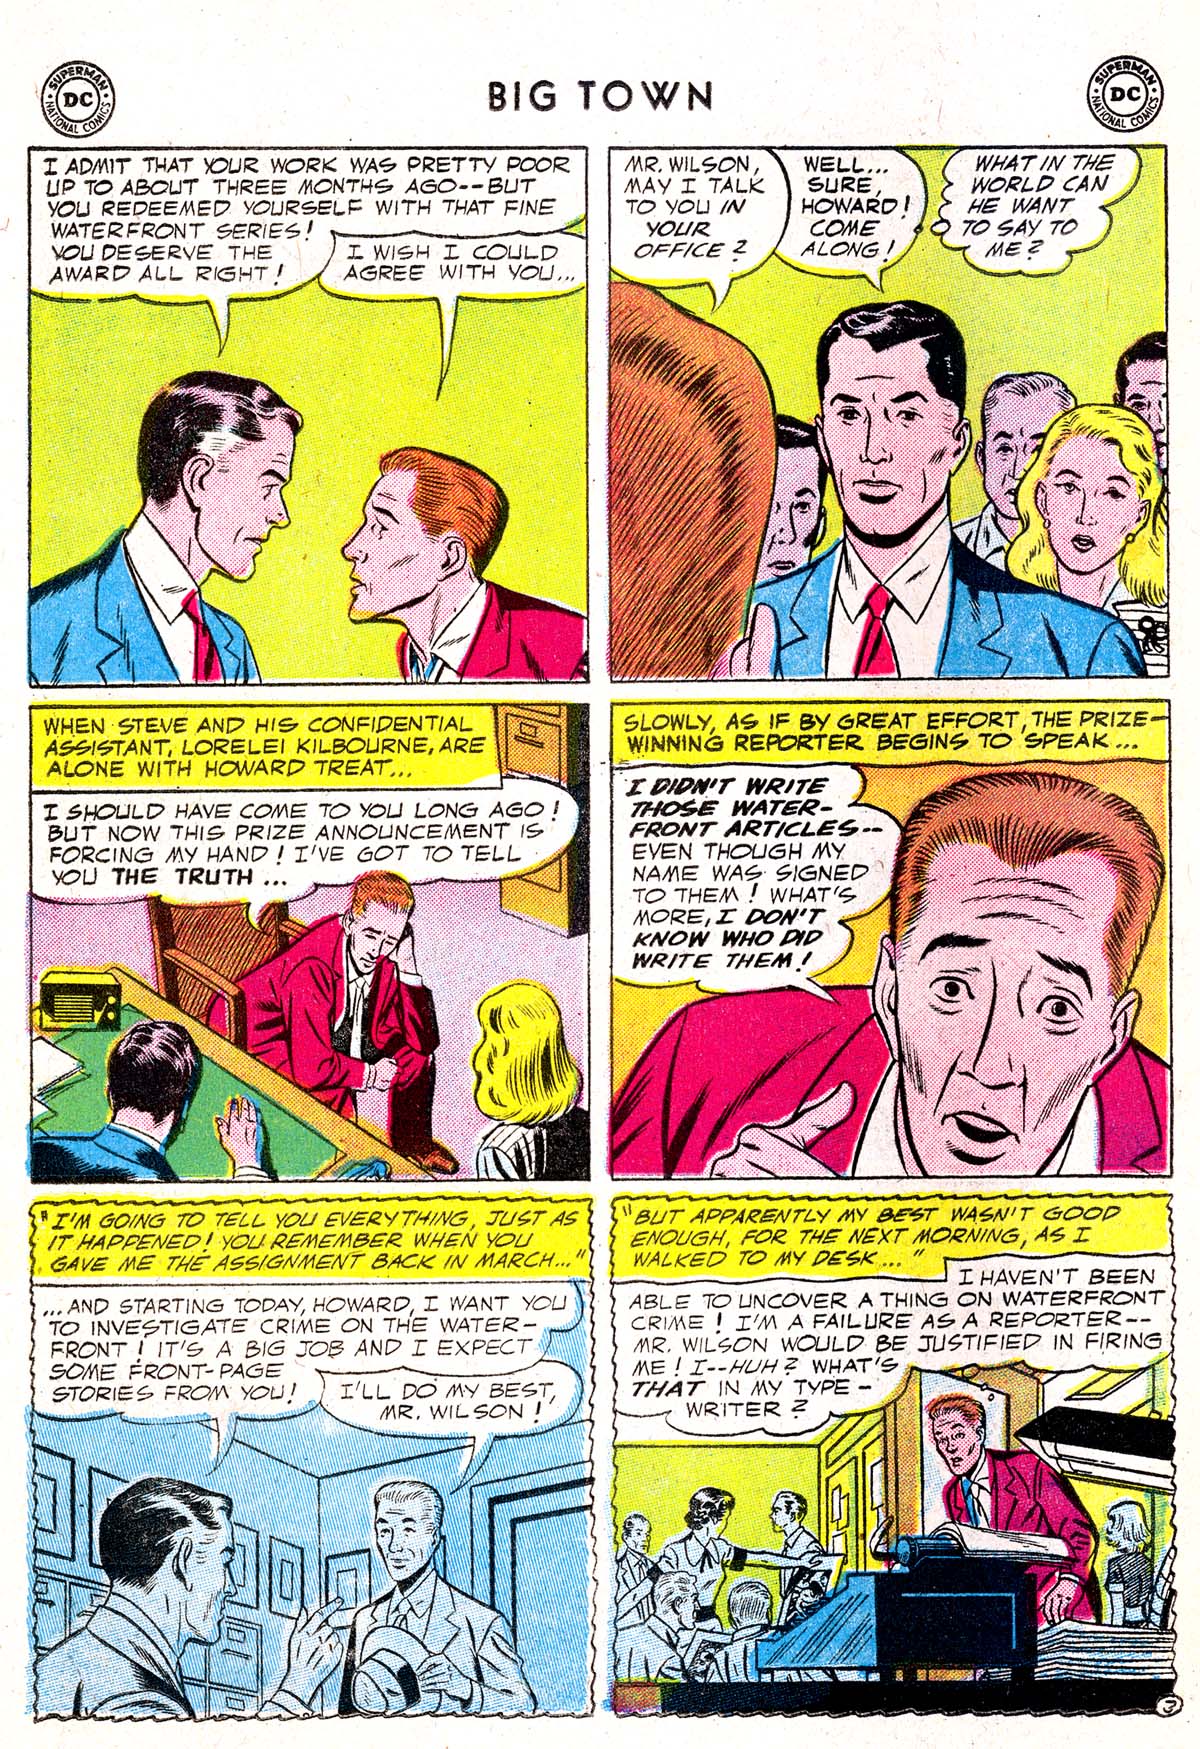 Big Town (1951) 37 Page 25